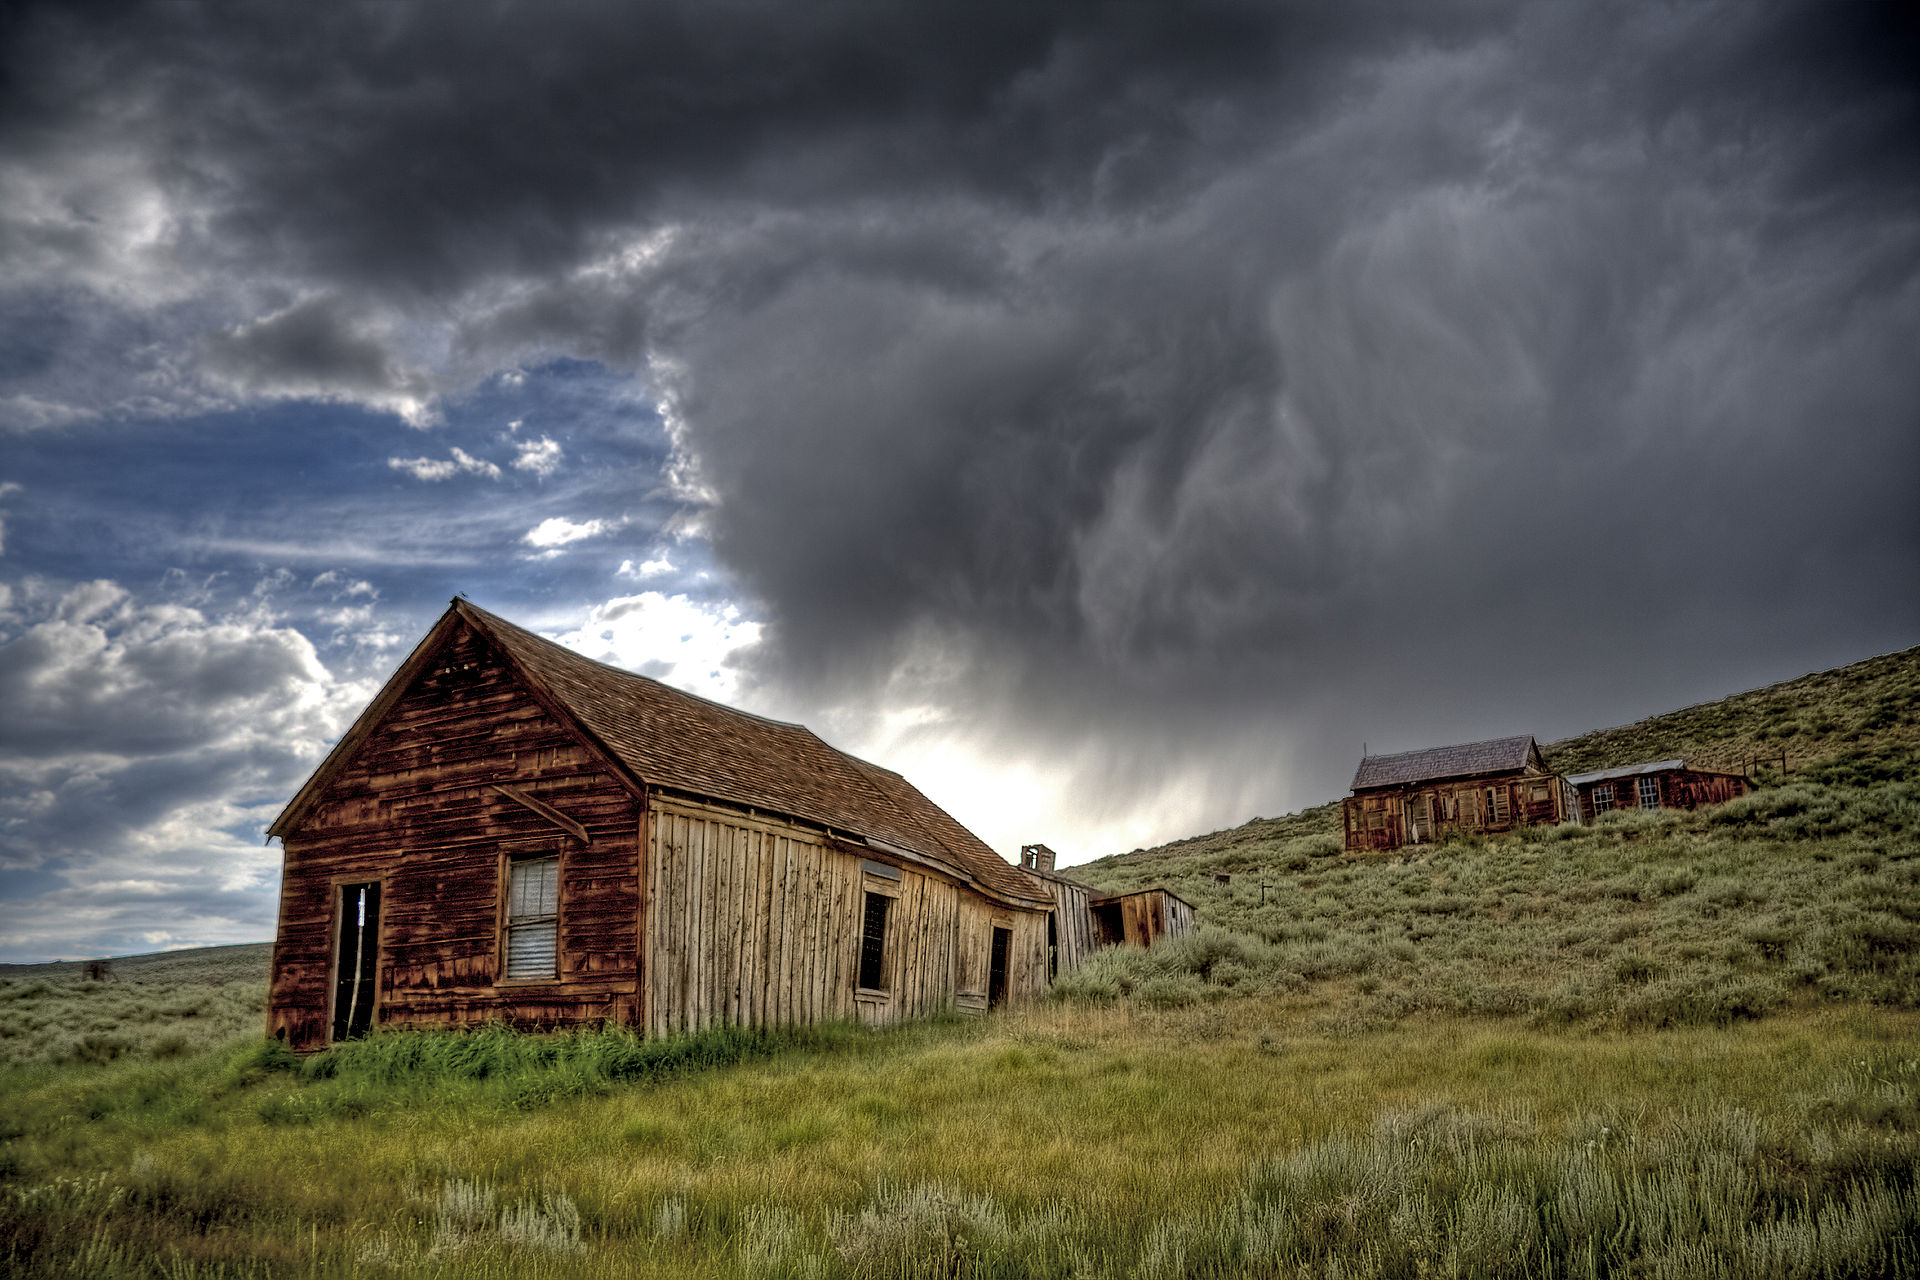 Bodie Ghost Town - Image via Wikipedia CC